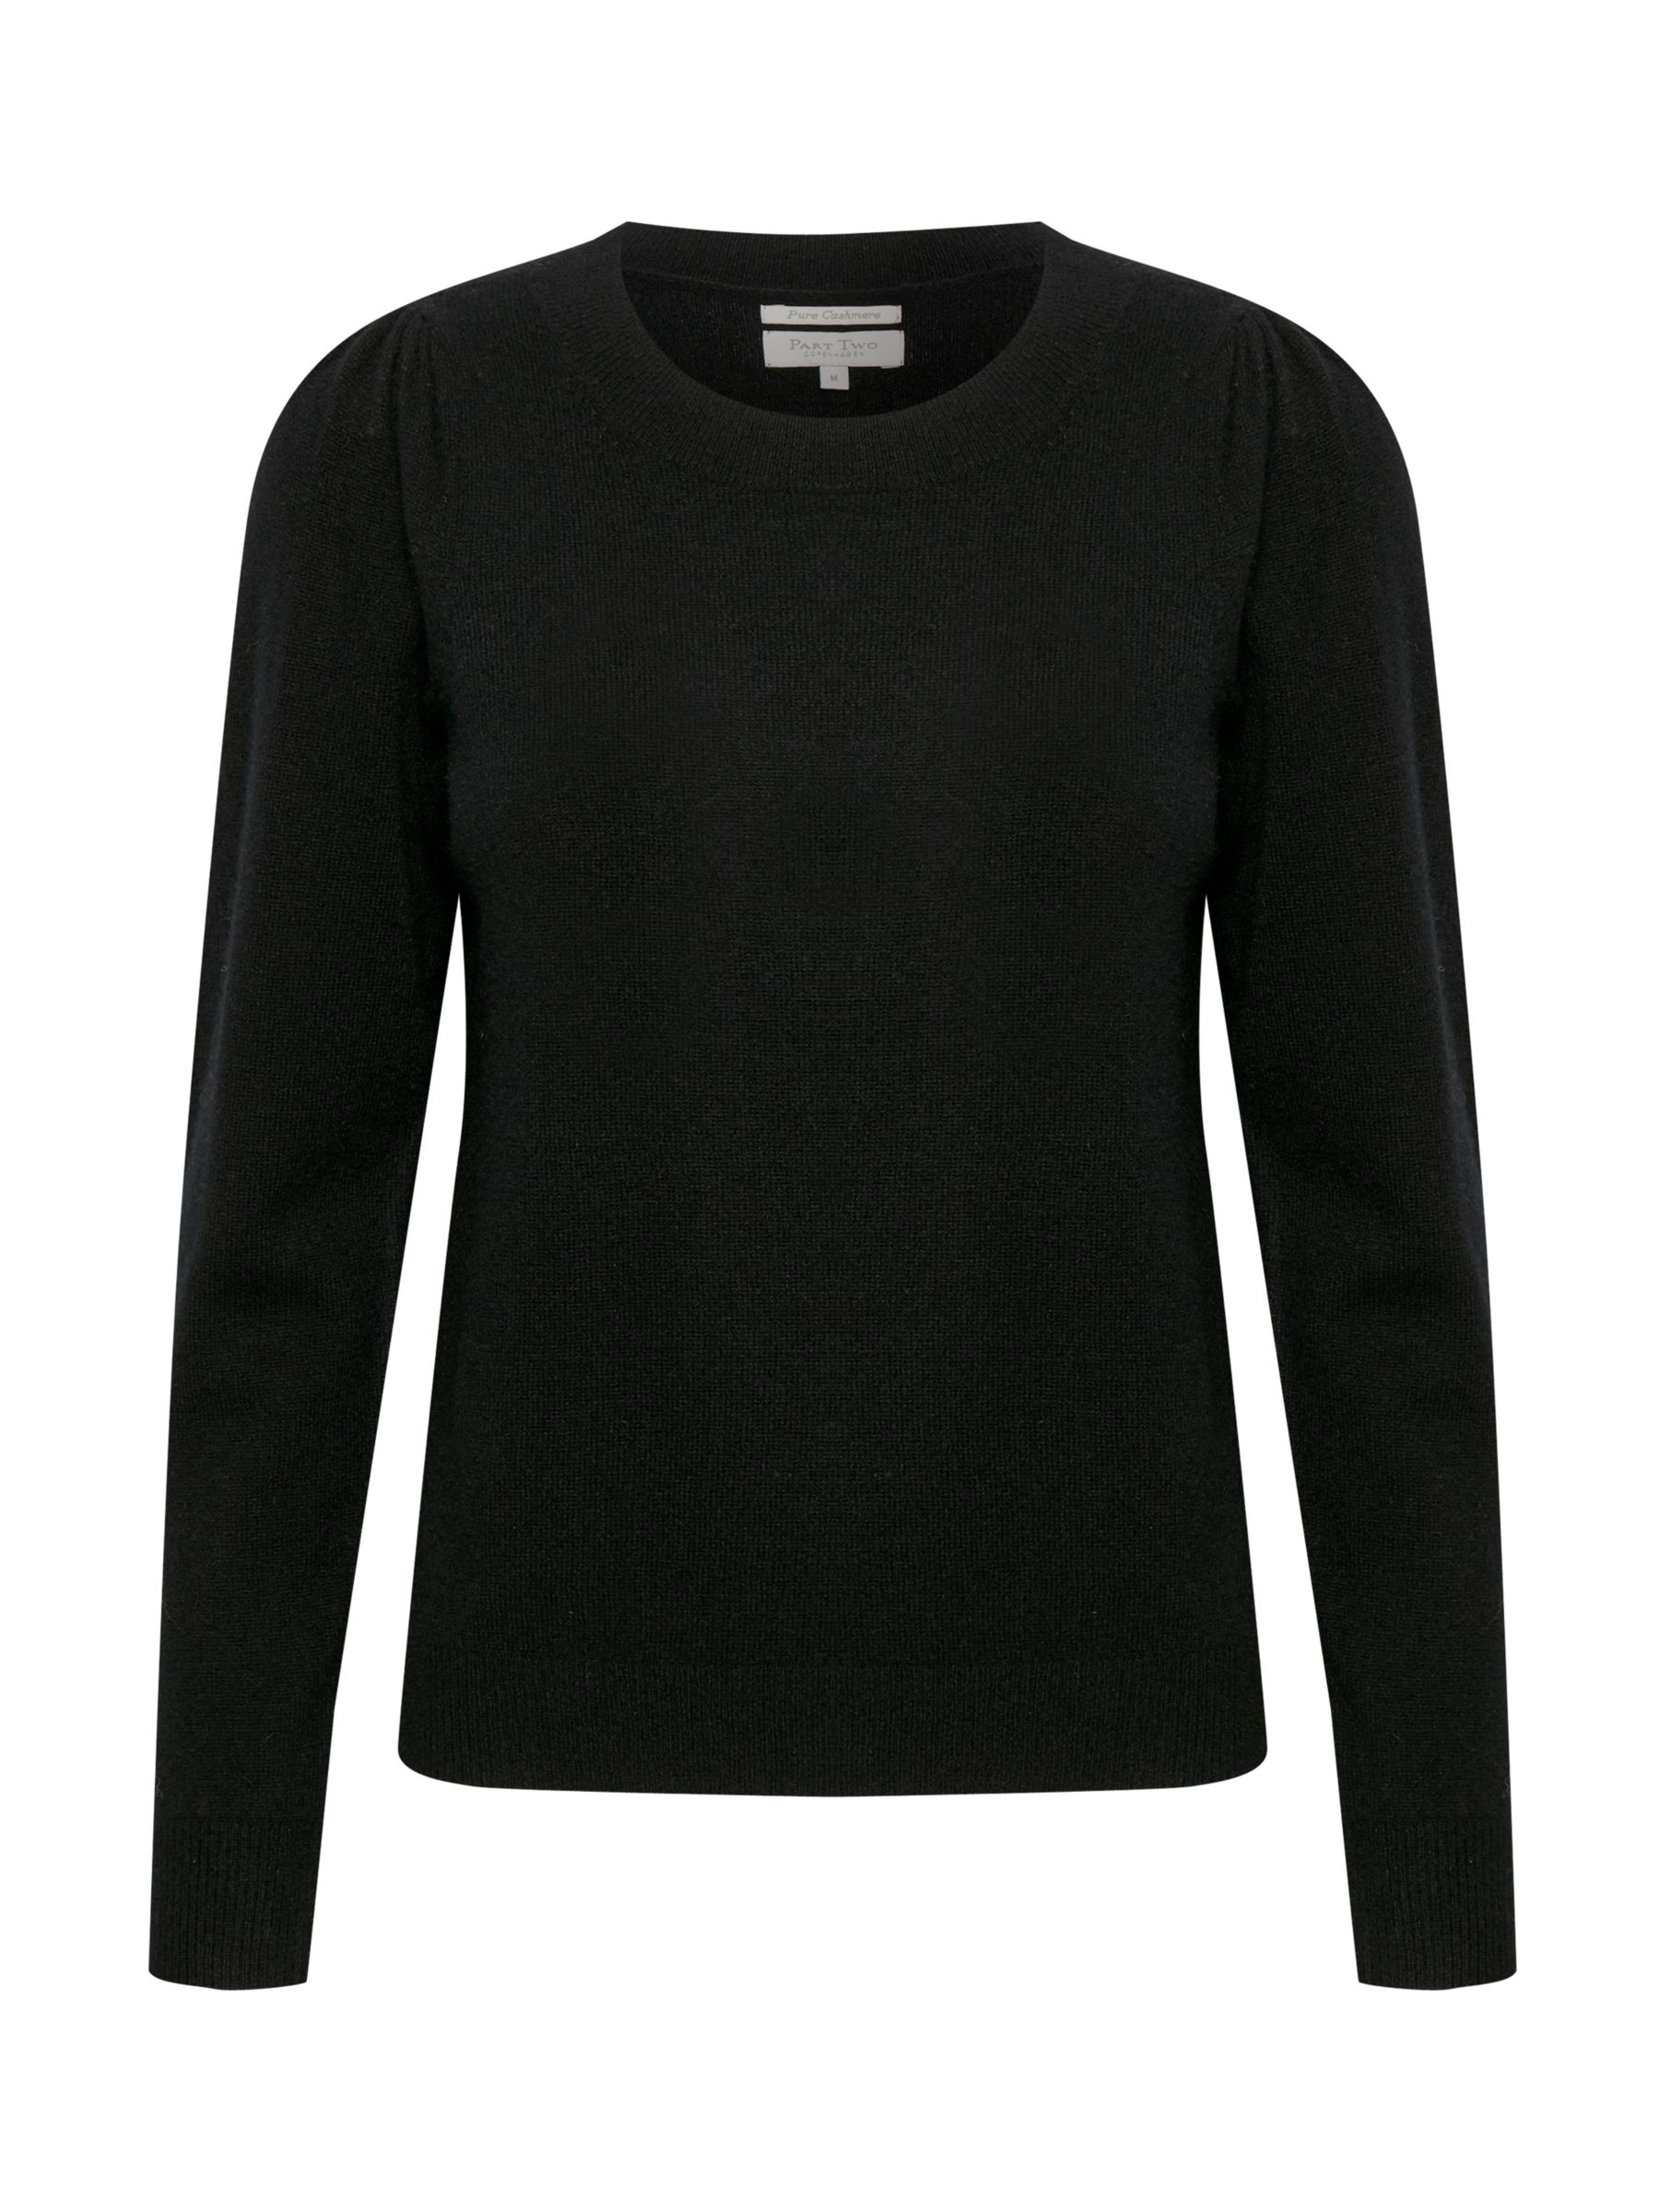 Part Two Evina Crew Neck Cashmere Top, Black at John Lewis & Partners